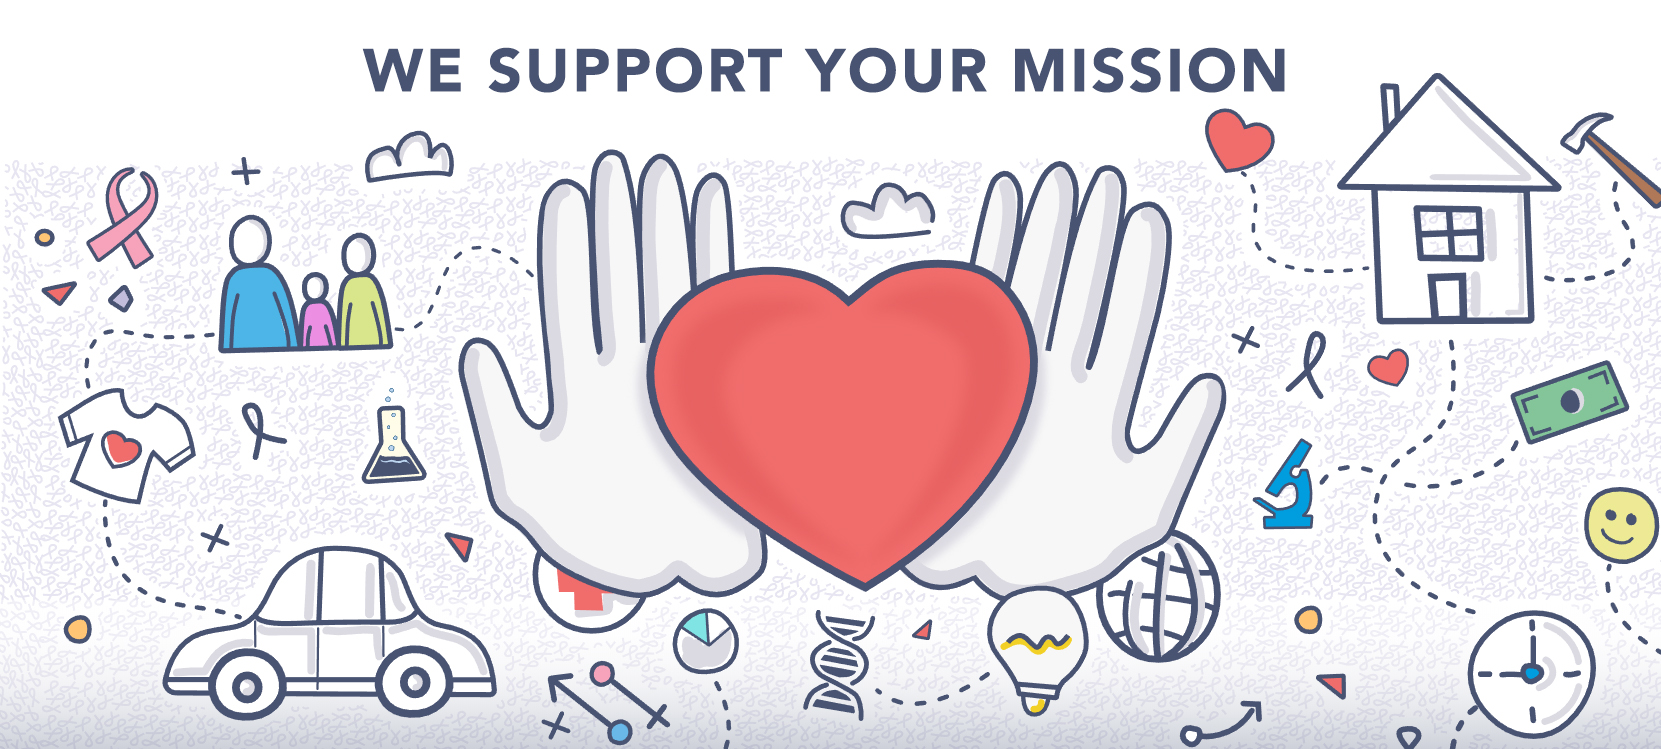 We Support Your Mission